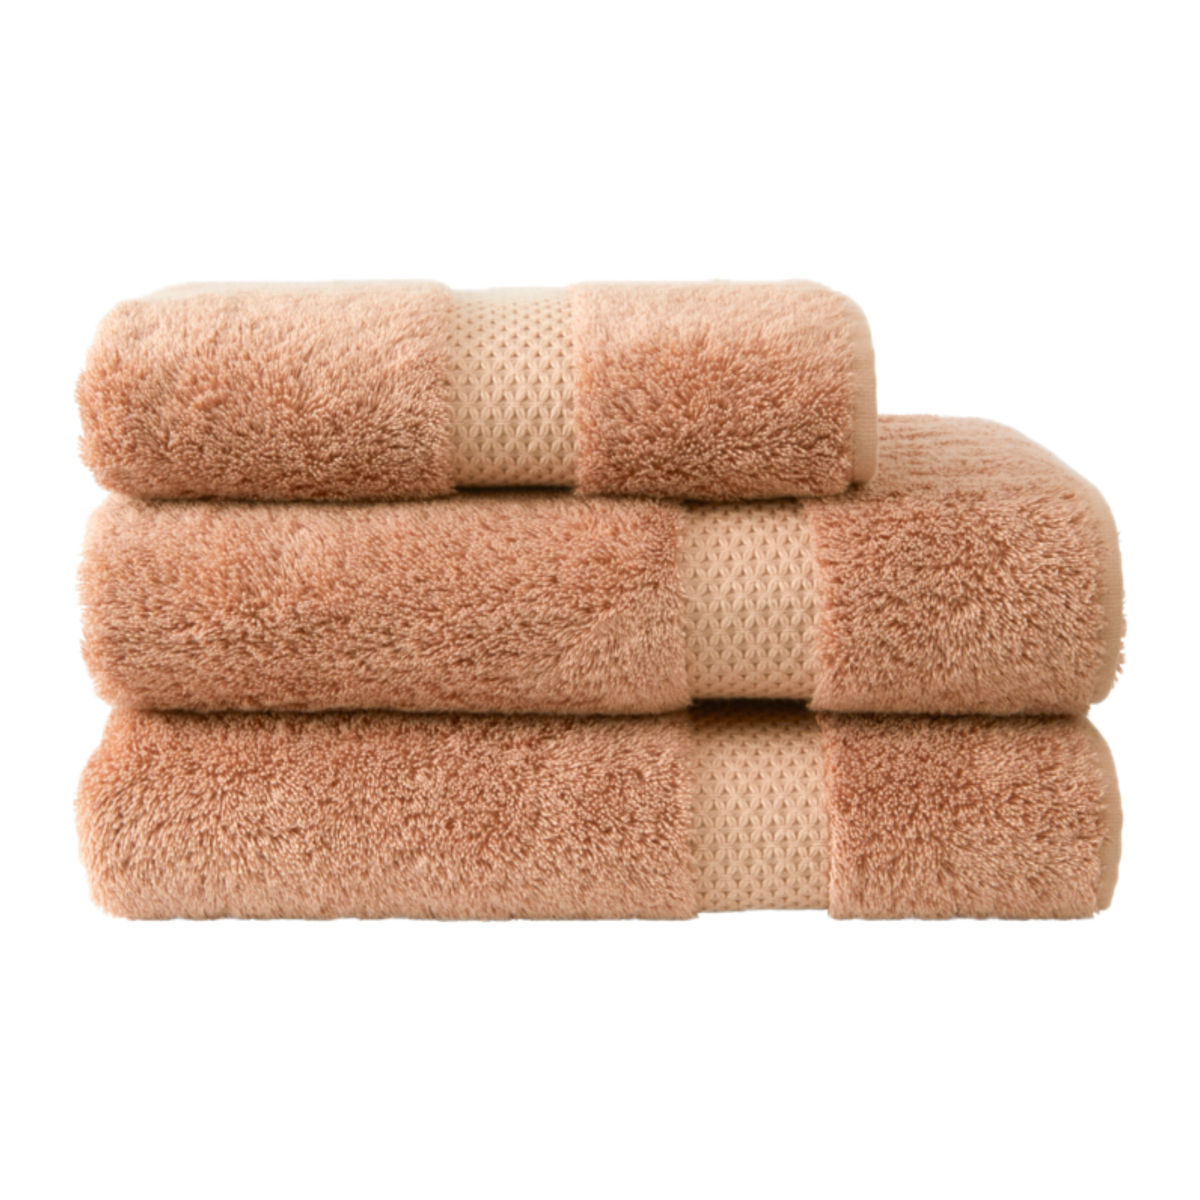 Stack of Folded Yves Delorme Etoile Bath Towels in Sienna Color